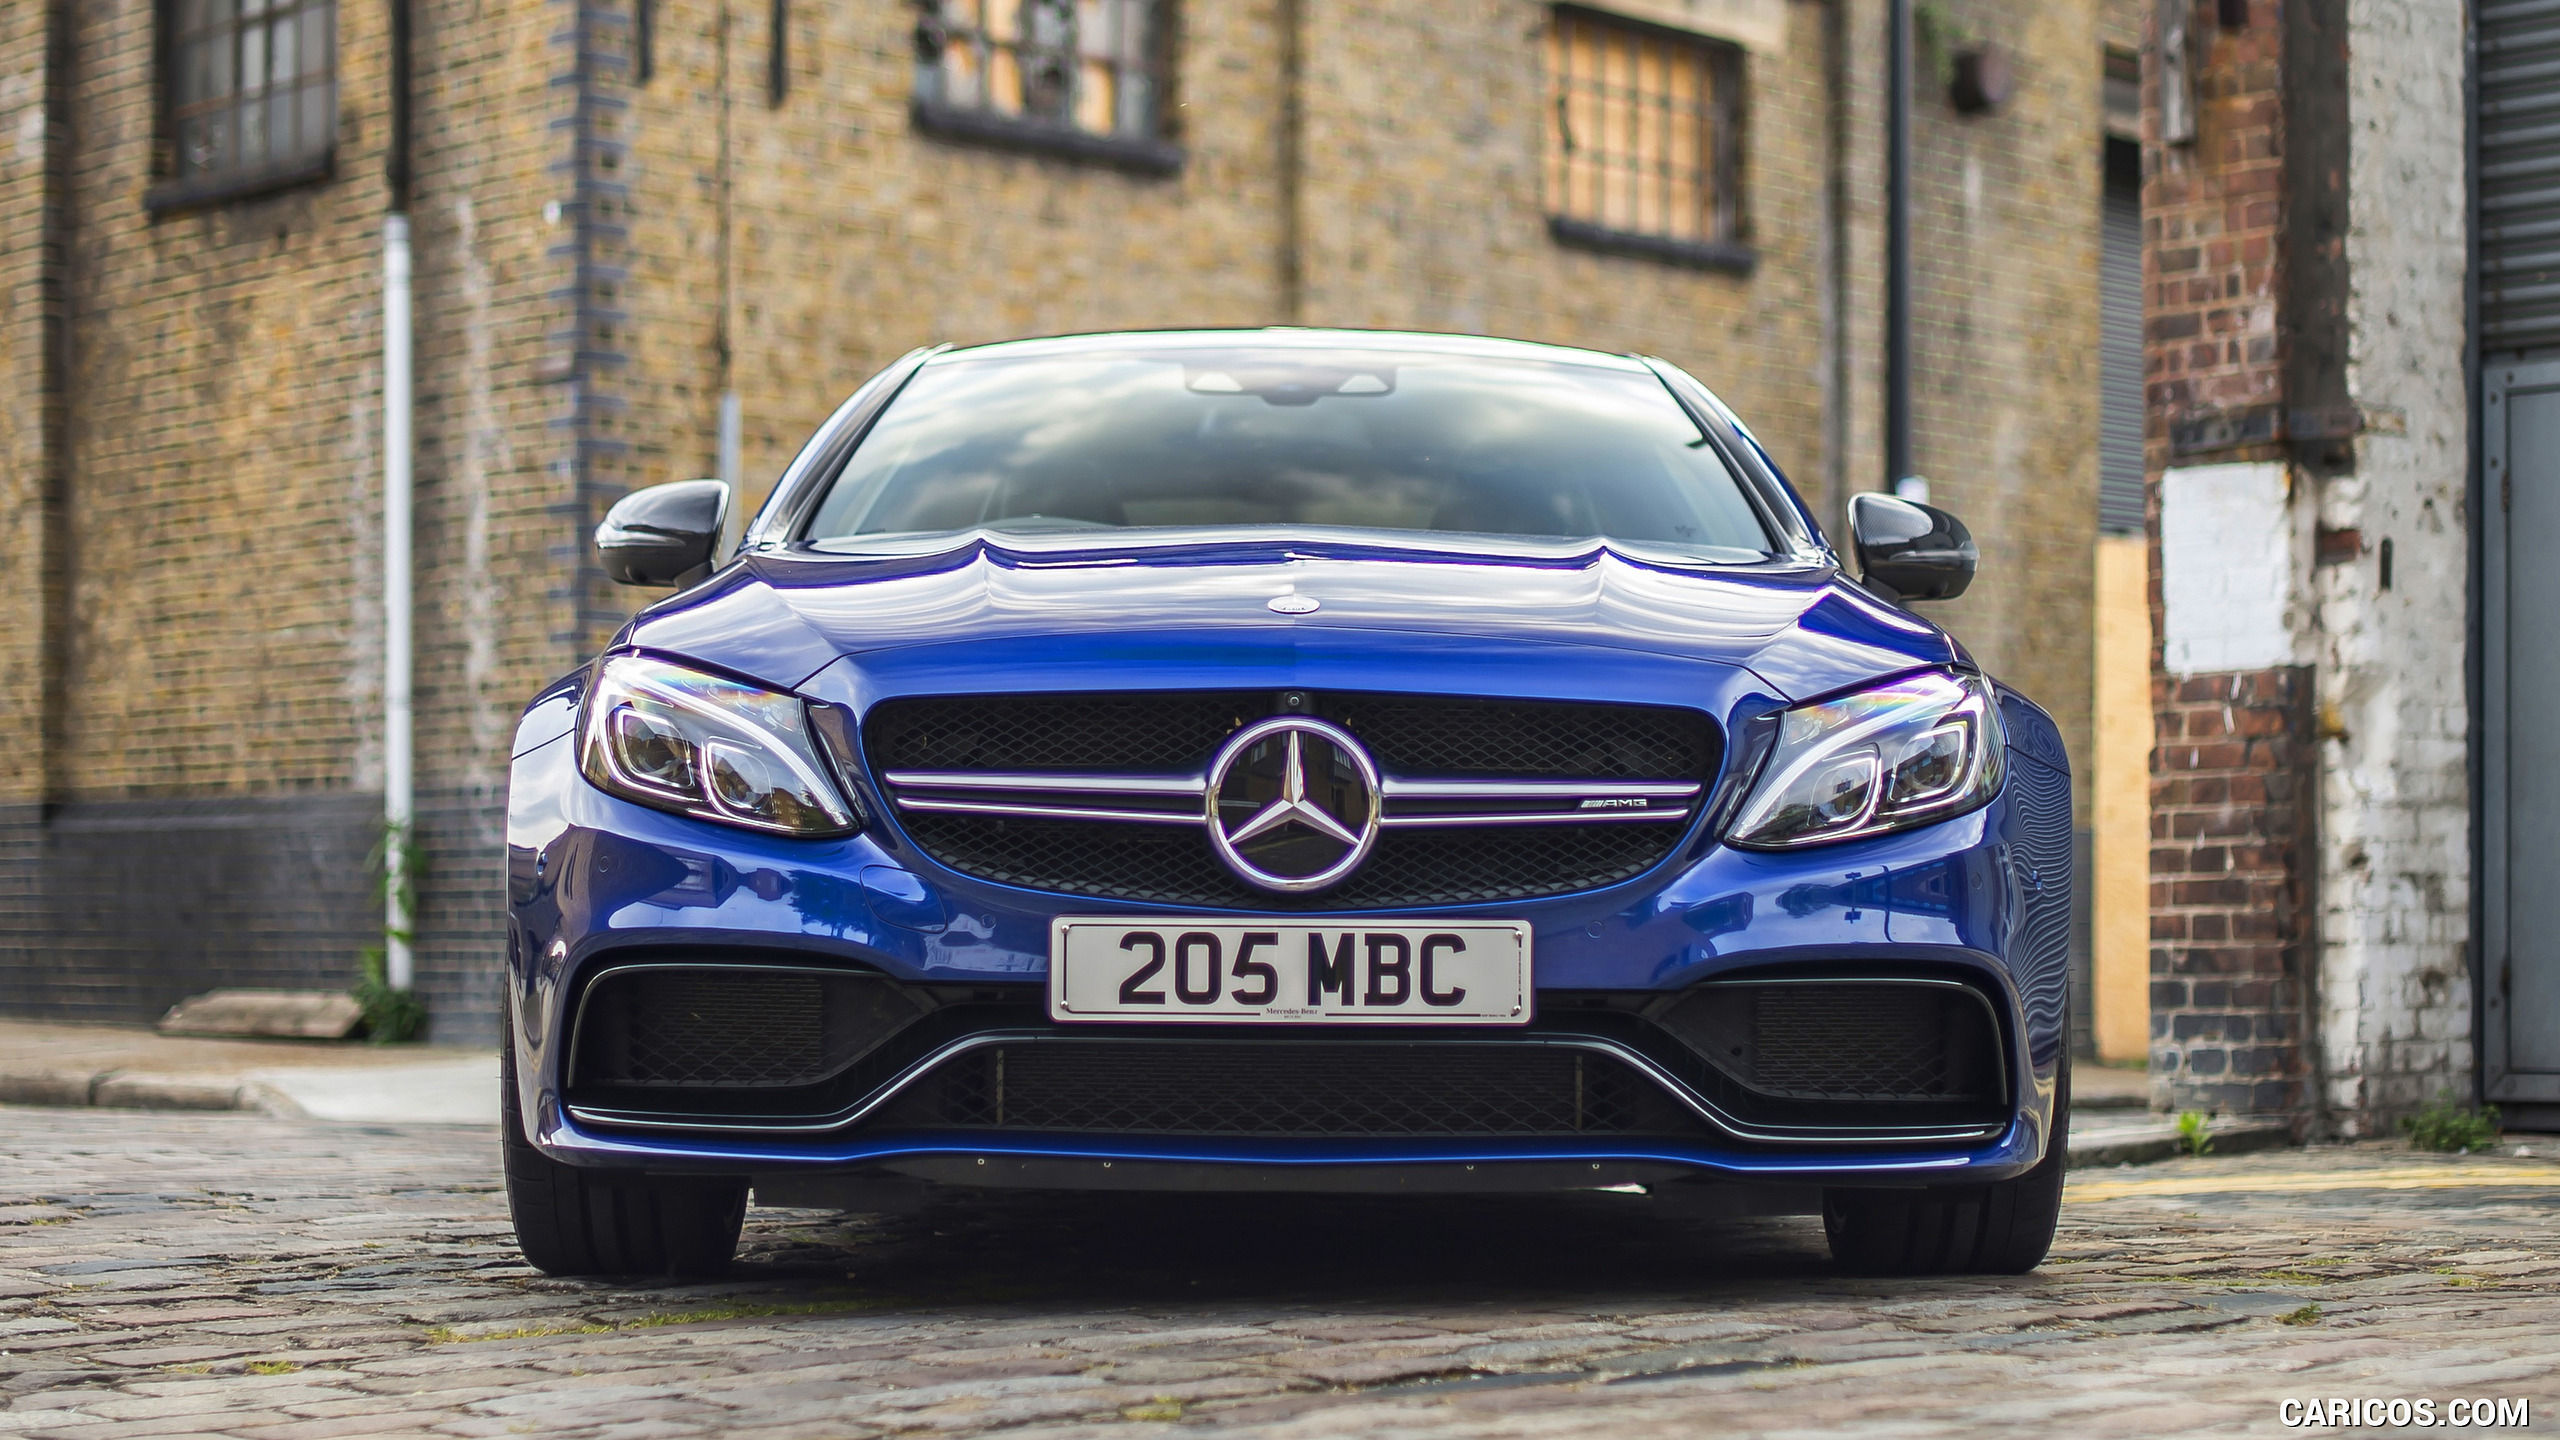 2017 Mercedes-AMG C63 S Coupe (UK-Spec) - Front, #20 of 52